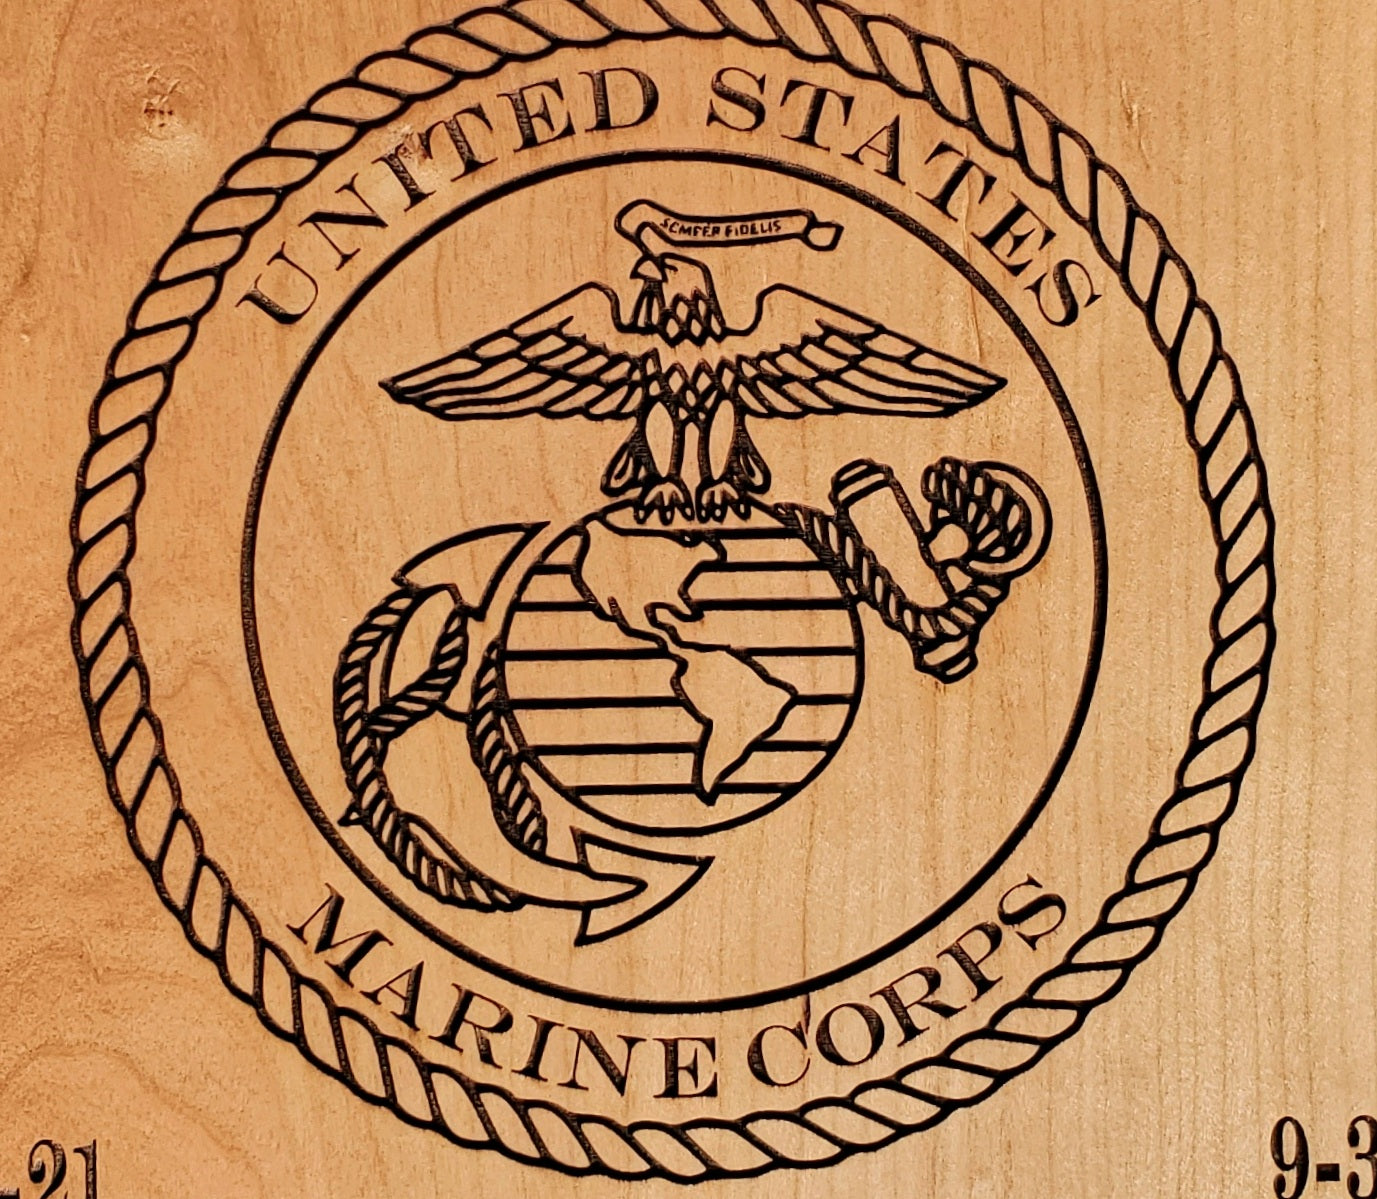 Marine Corps Journey Carved Wooden Plaque Boot Camp Graduation Gift With Yellow Footprints and EGA